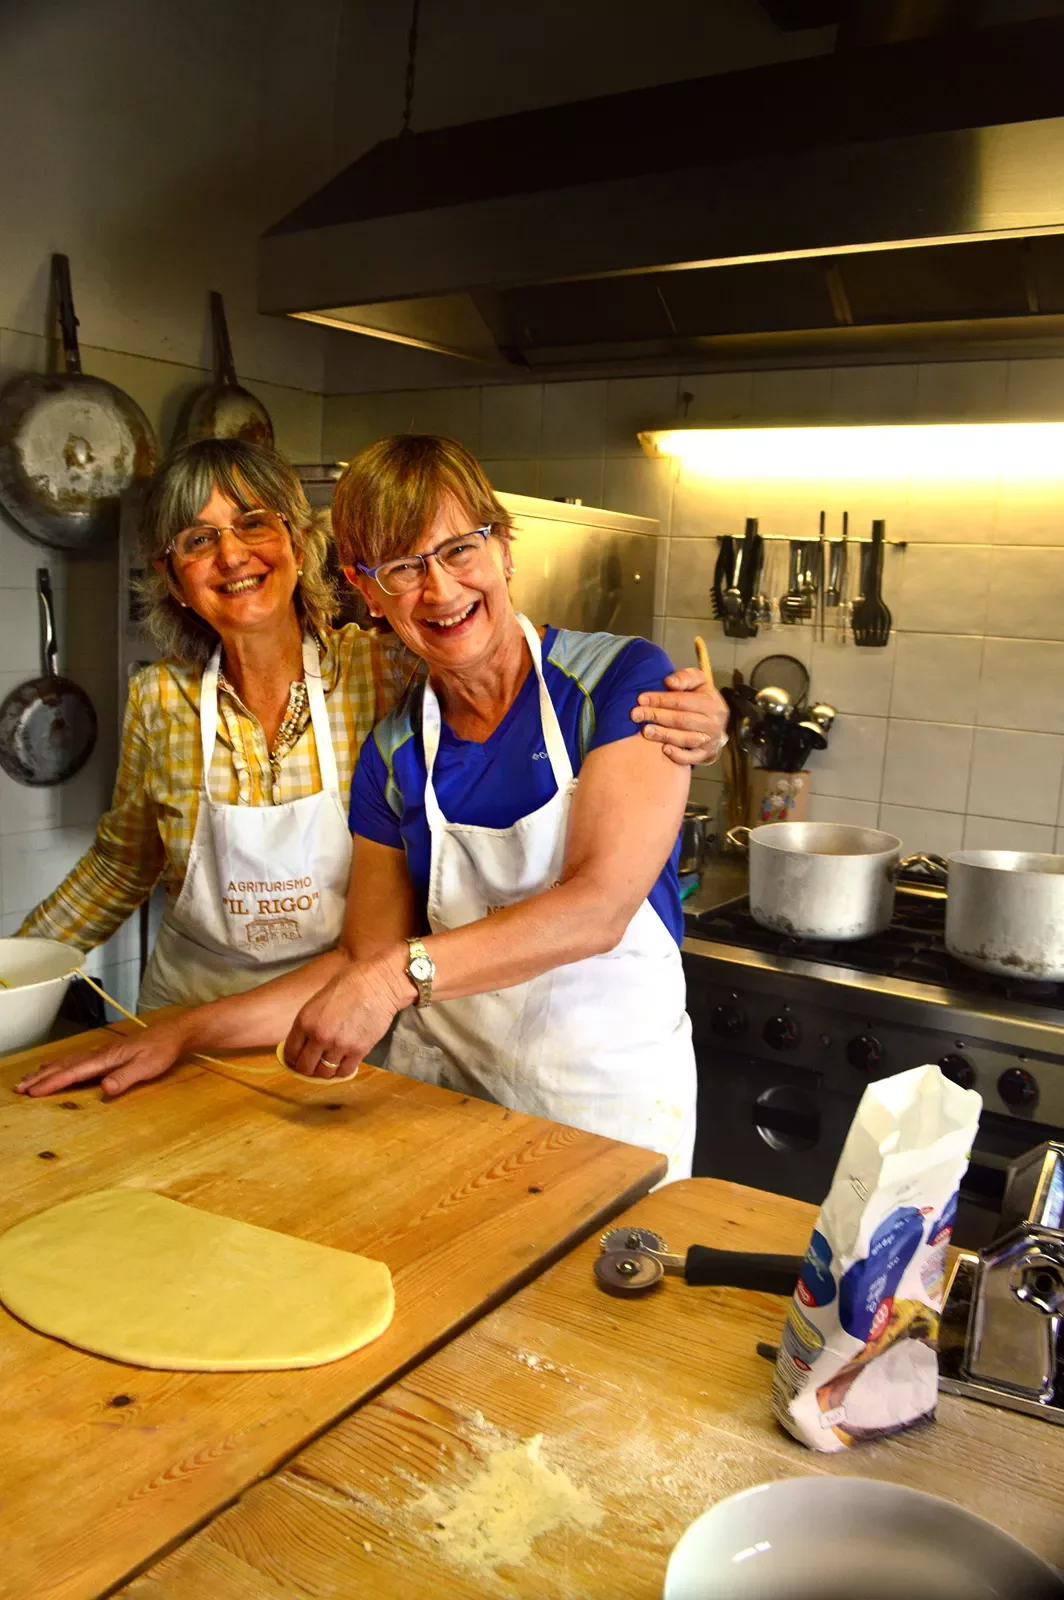 Guest and local guide at pasta making class.